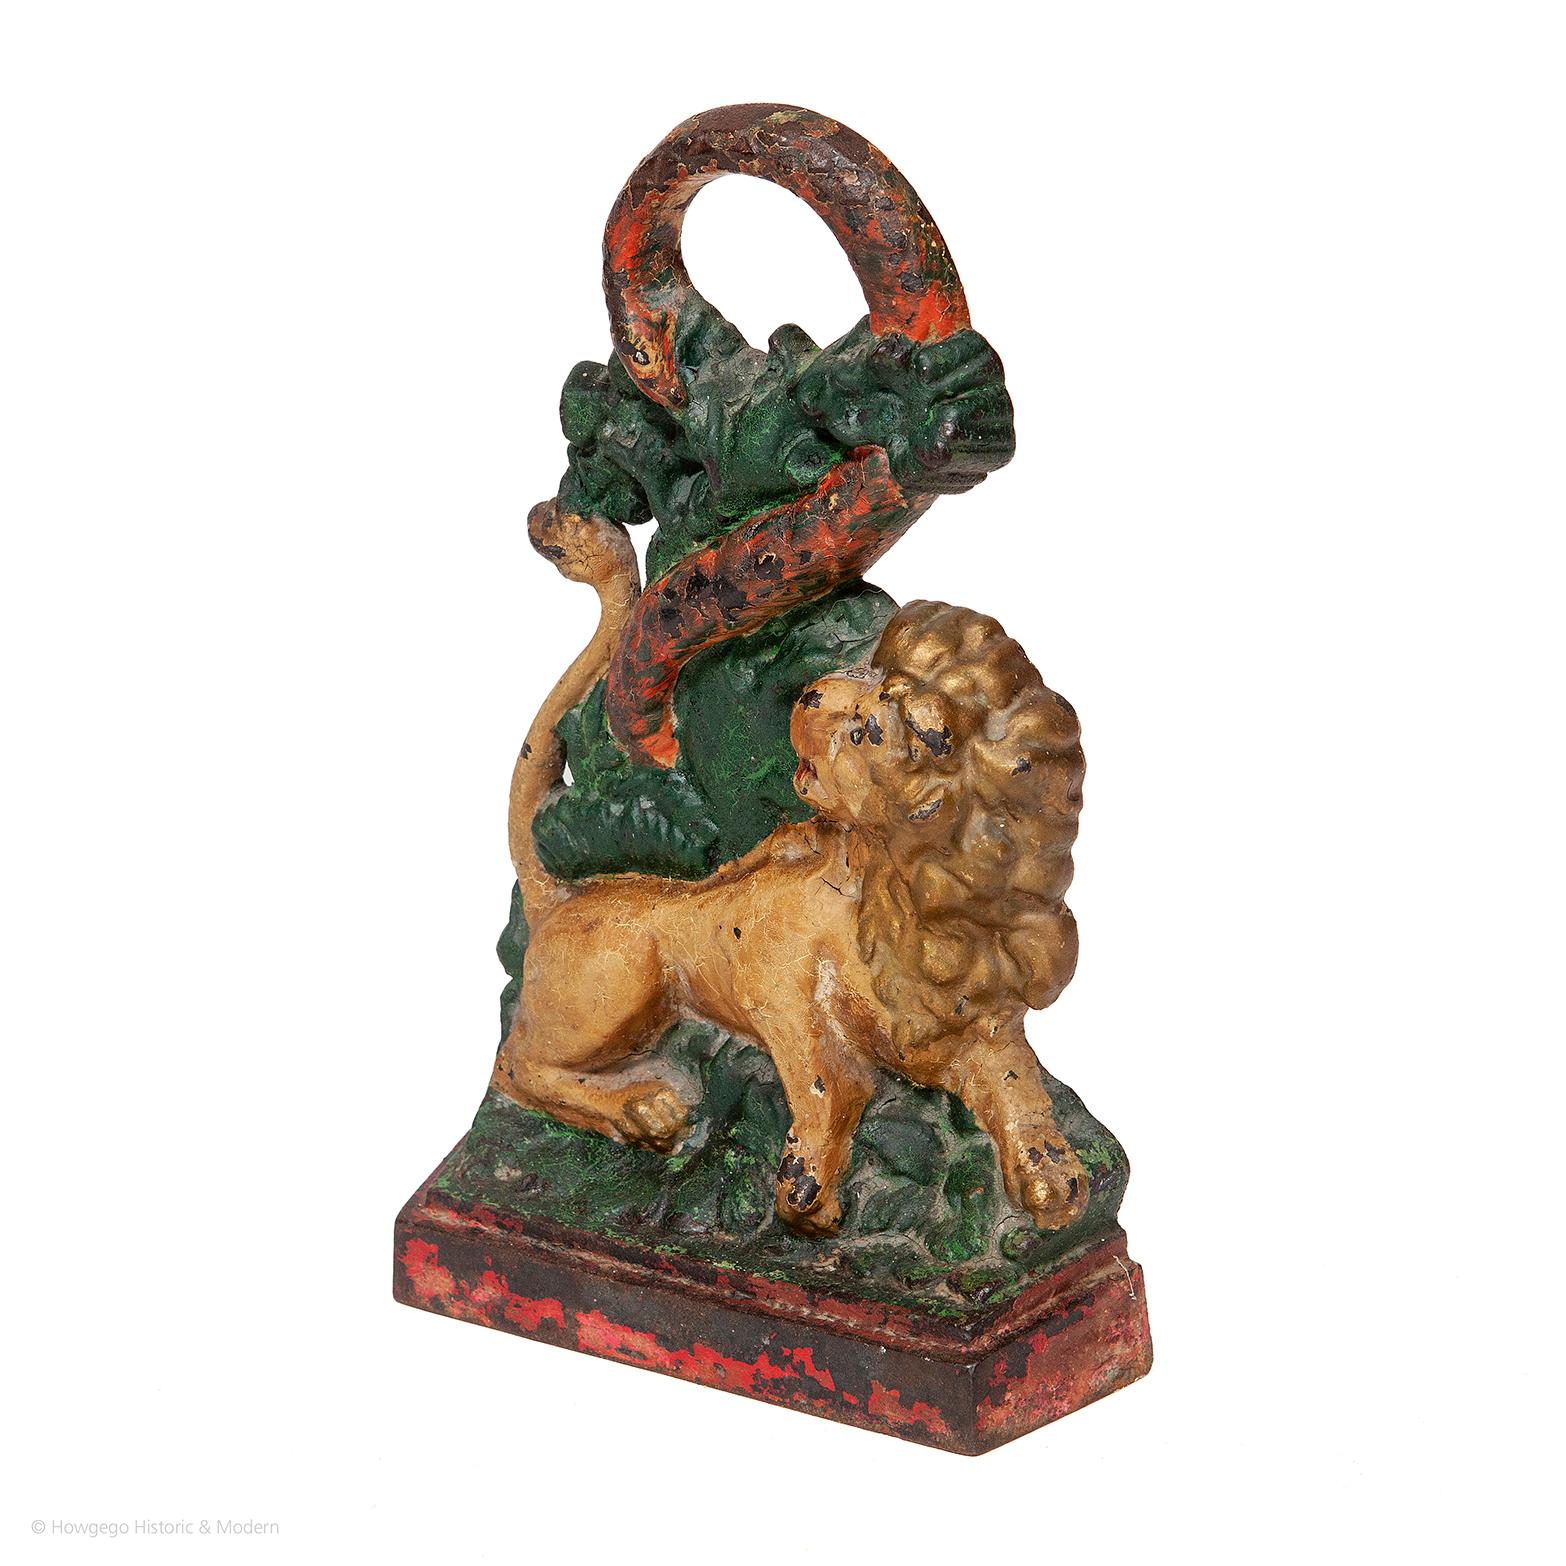 Victorian, cast iron, door stop with a lion & a serpent, retaining original green, red & gold paint, 11 ¼” high

Rare doorstop, representing protection against temptation.
The lion amongst foliage baring his teeth and looking up at the serpent